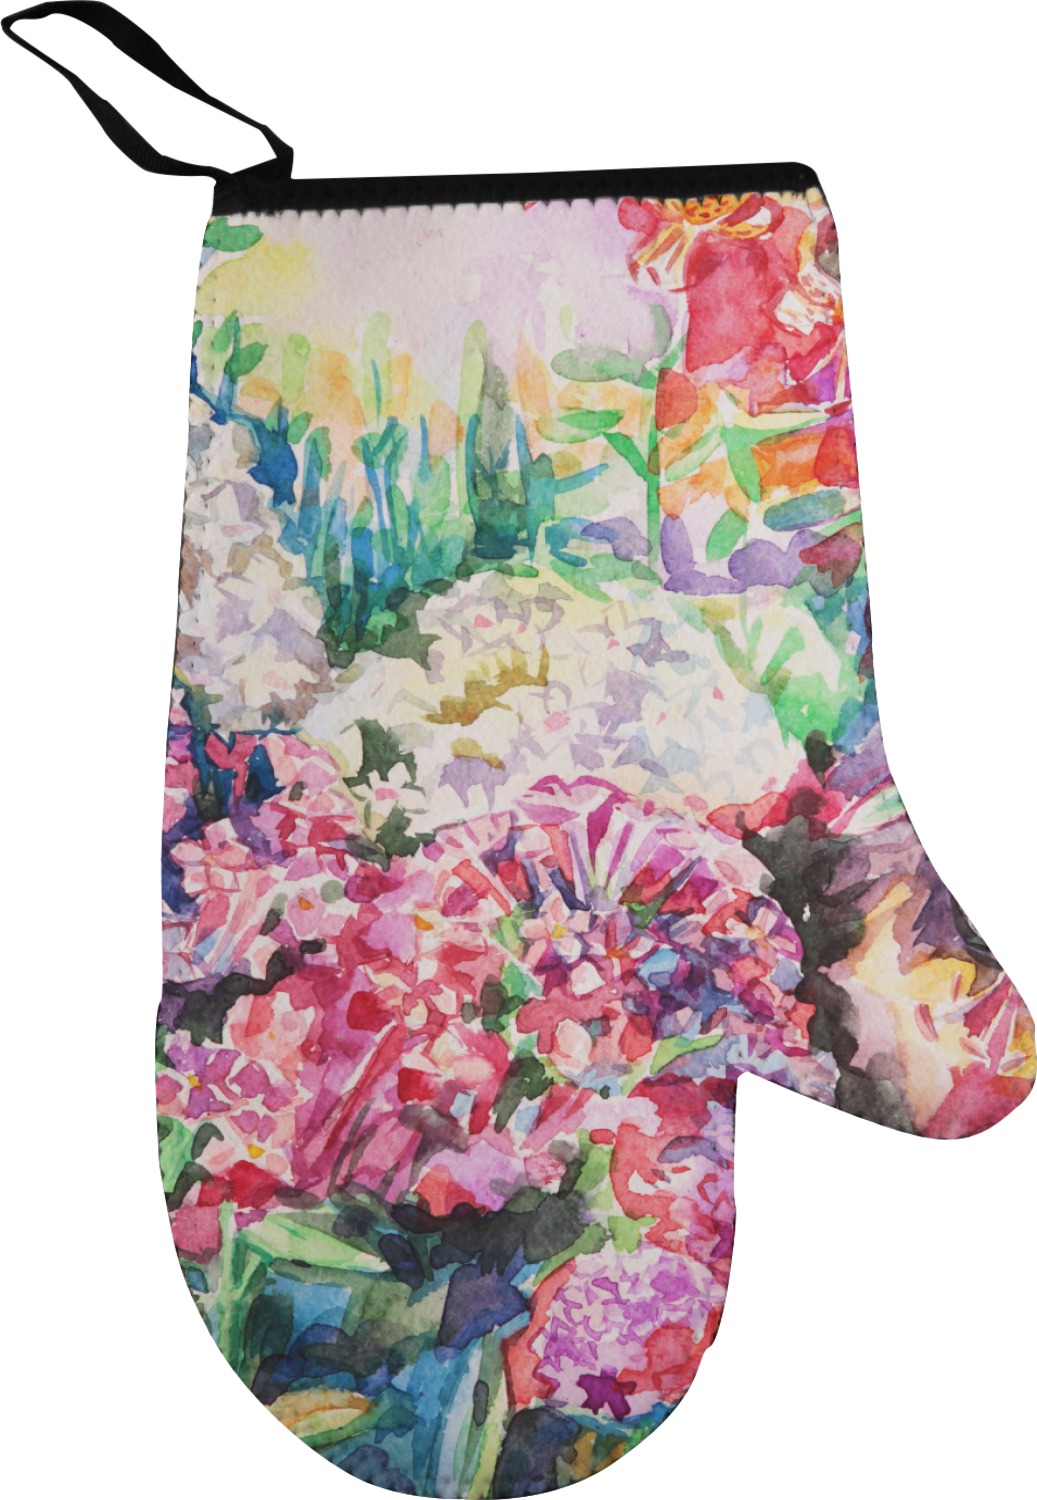 https://www.youcustomizeit.com/common/MAKE/645937/Watercolor-Floral-Personalized-Oven-Mitt.jpg?lm=1553825410